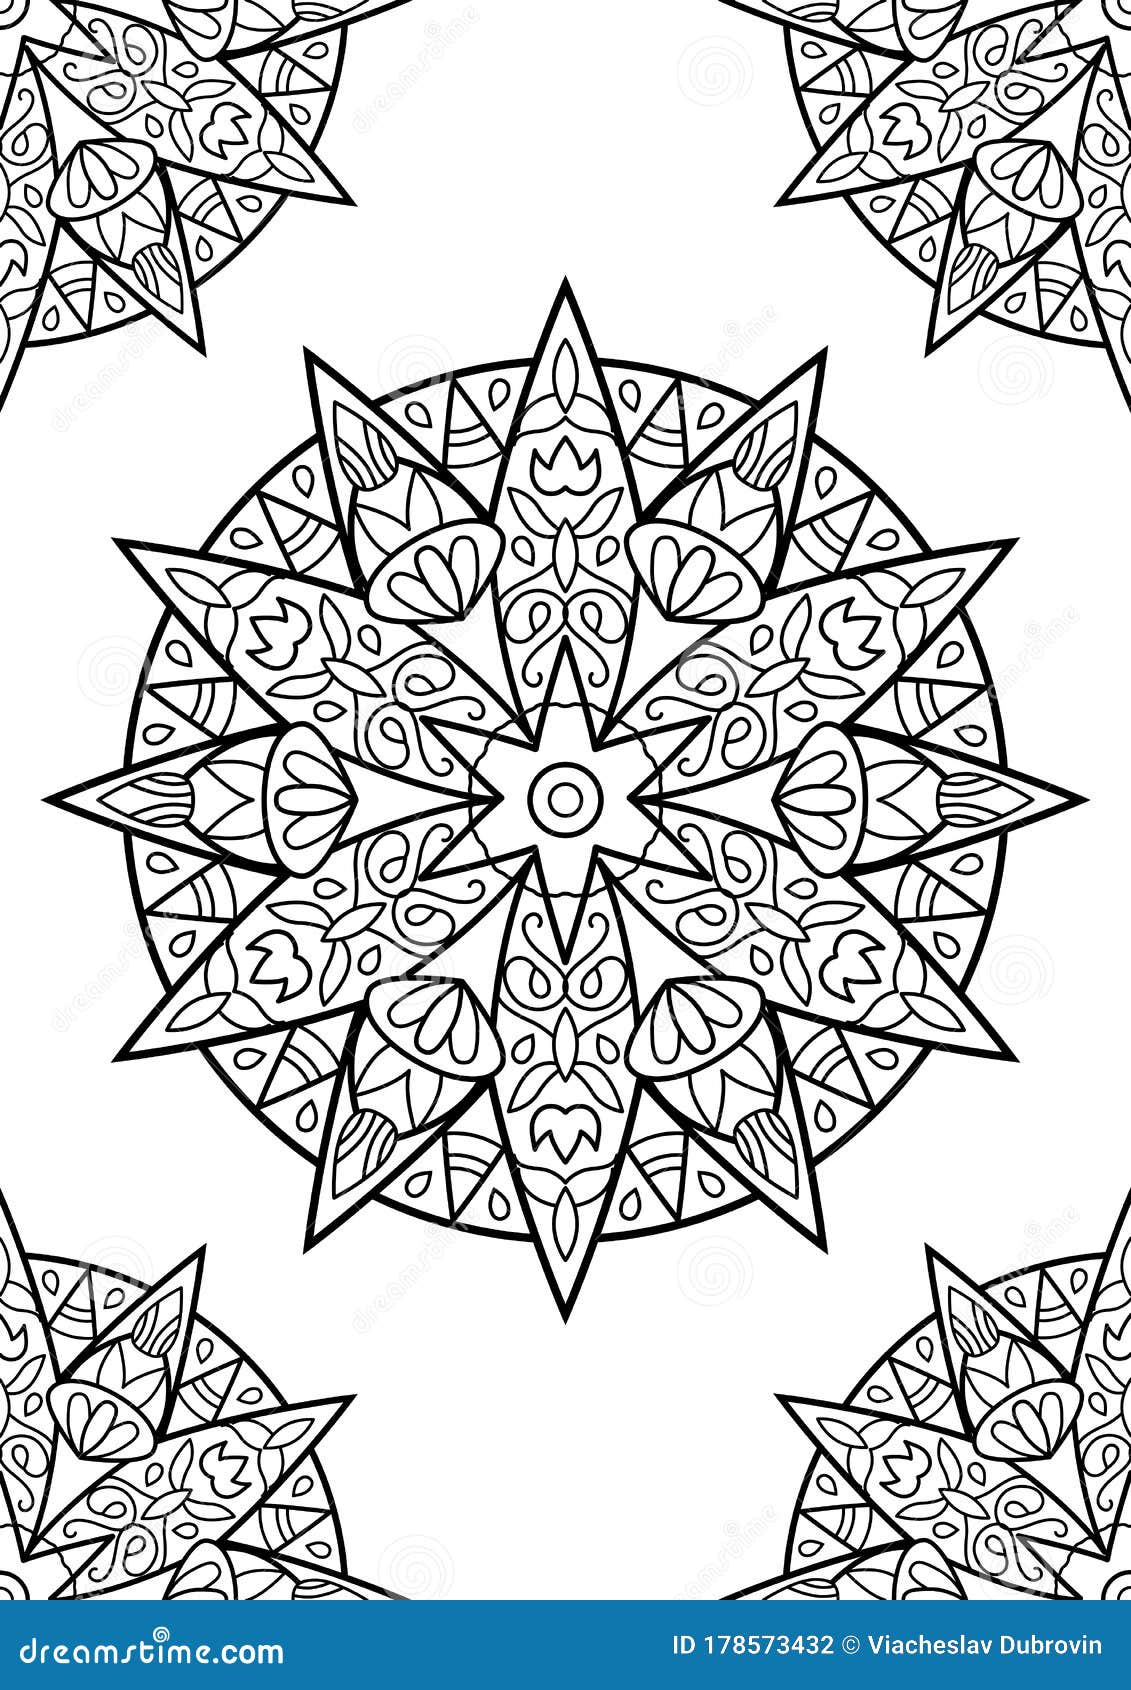 Detailed Mandala Coloring Book Black And White Vector Ornament On Vertical Page Adult Coloring Page Stock Vector Illustration Of Hobby Meditative 178573432